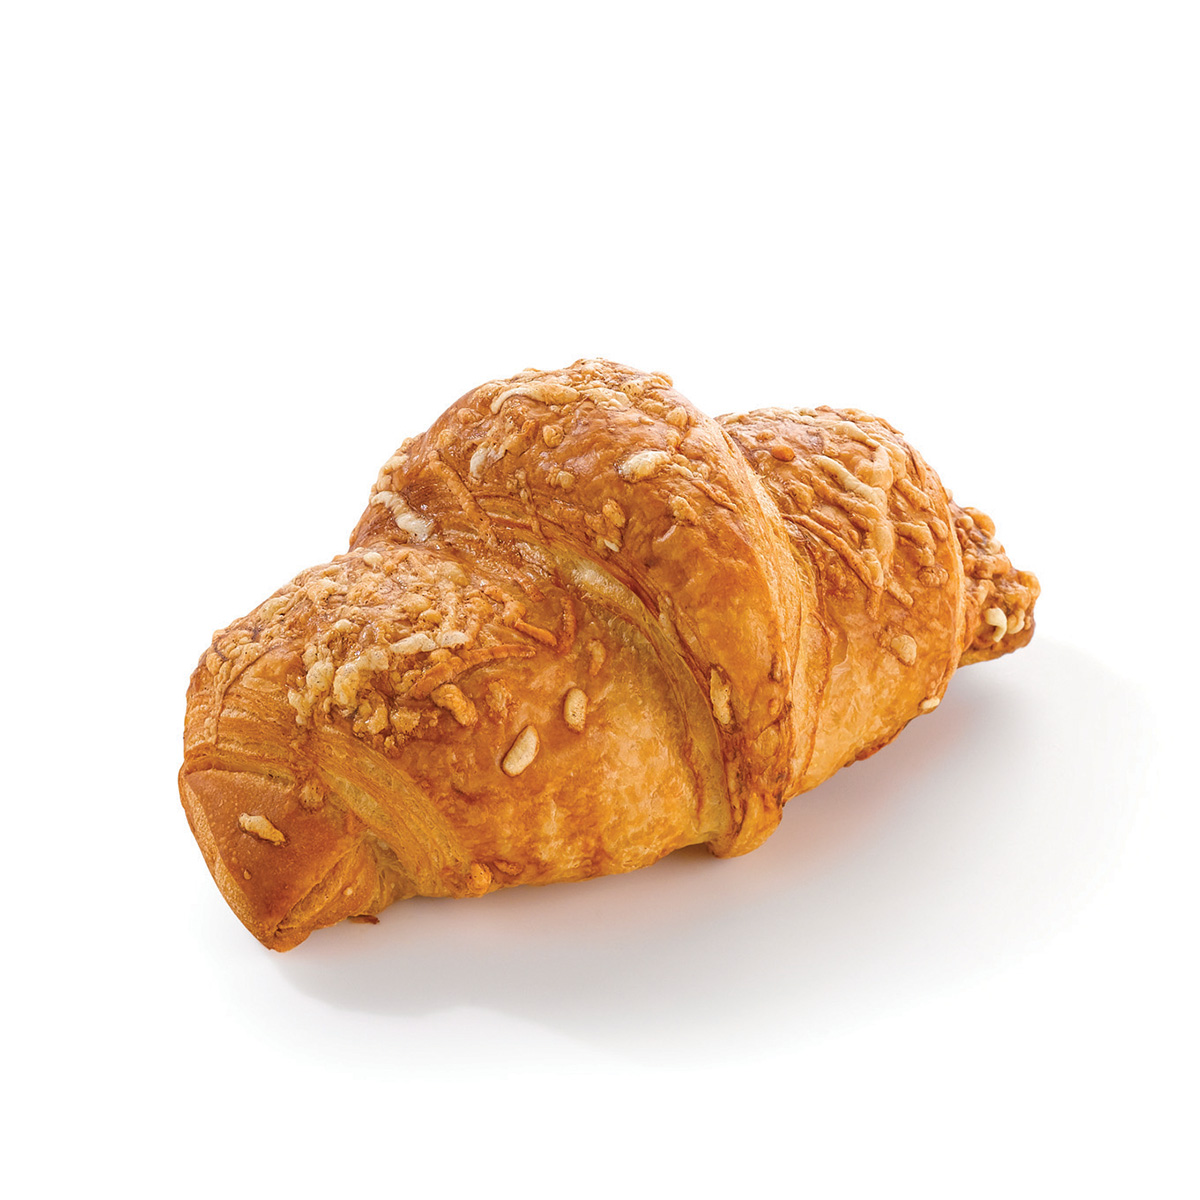 Molco Croissant jambon-fromage, beurre